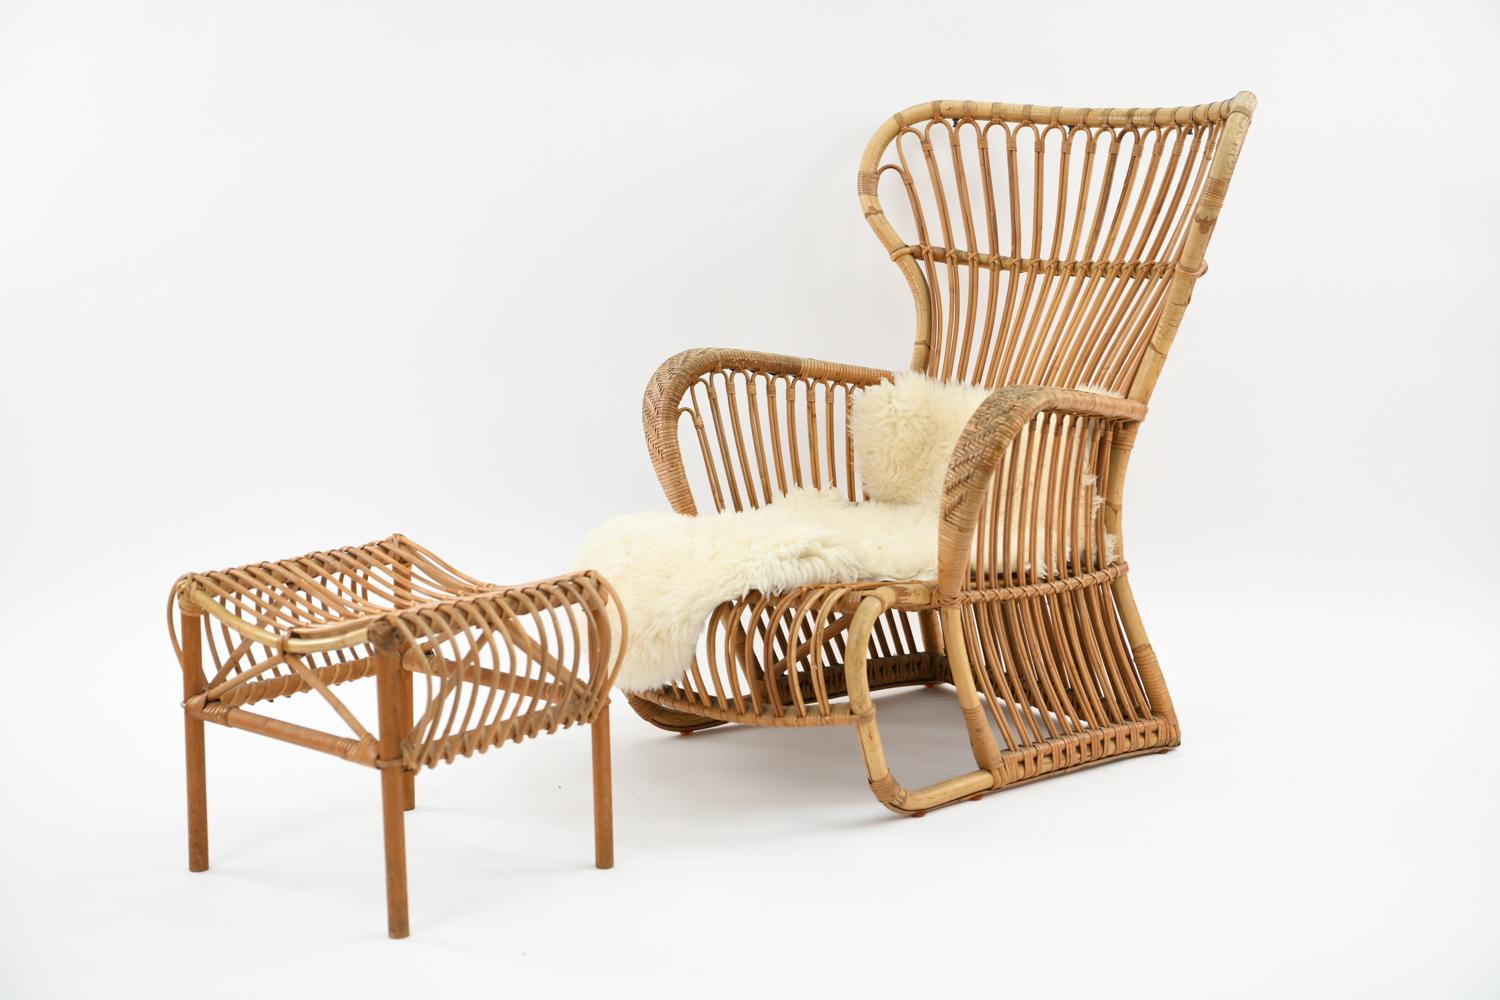 A gorgeous Danish midcentury sculptural bamboo wingback chair and ottoman designed by Viggo Boesen, Arne Jacobsen, or Kindt Larsen for Wengler, similar to Boesen's 